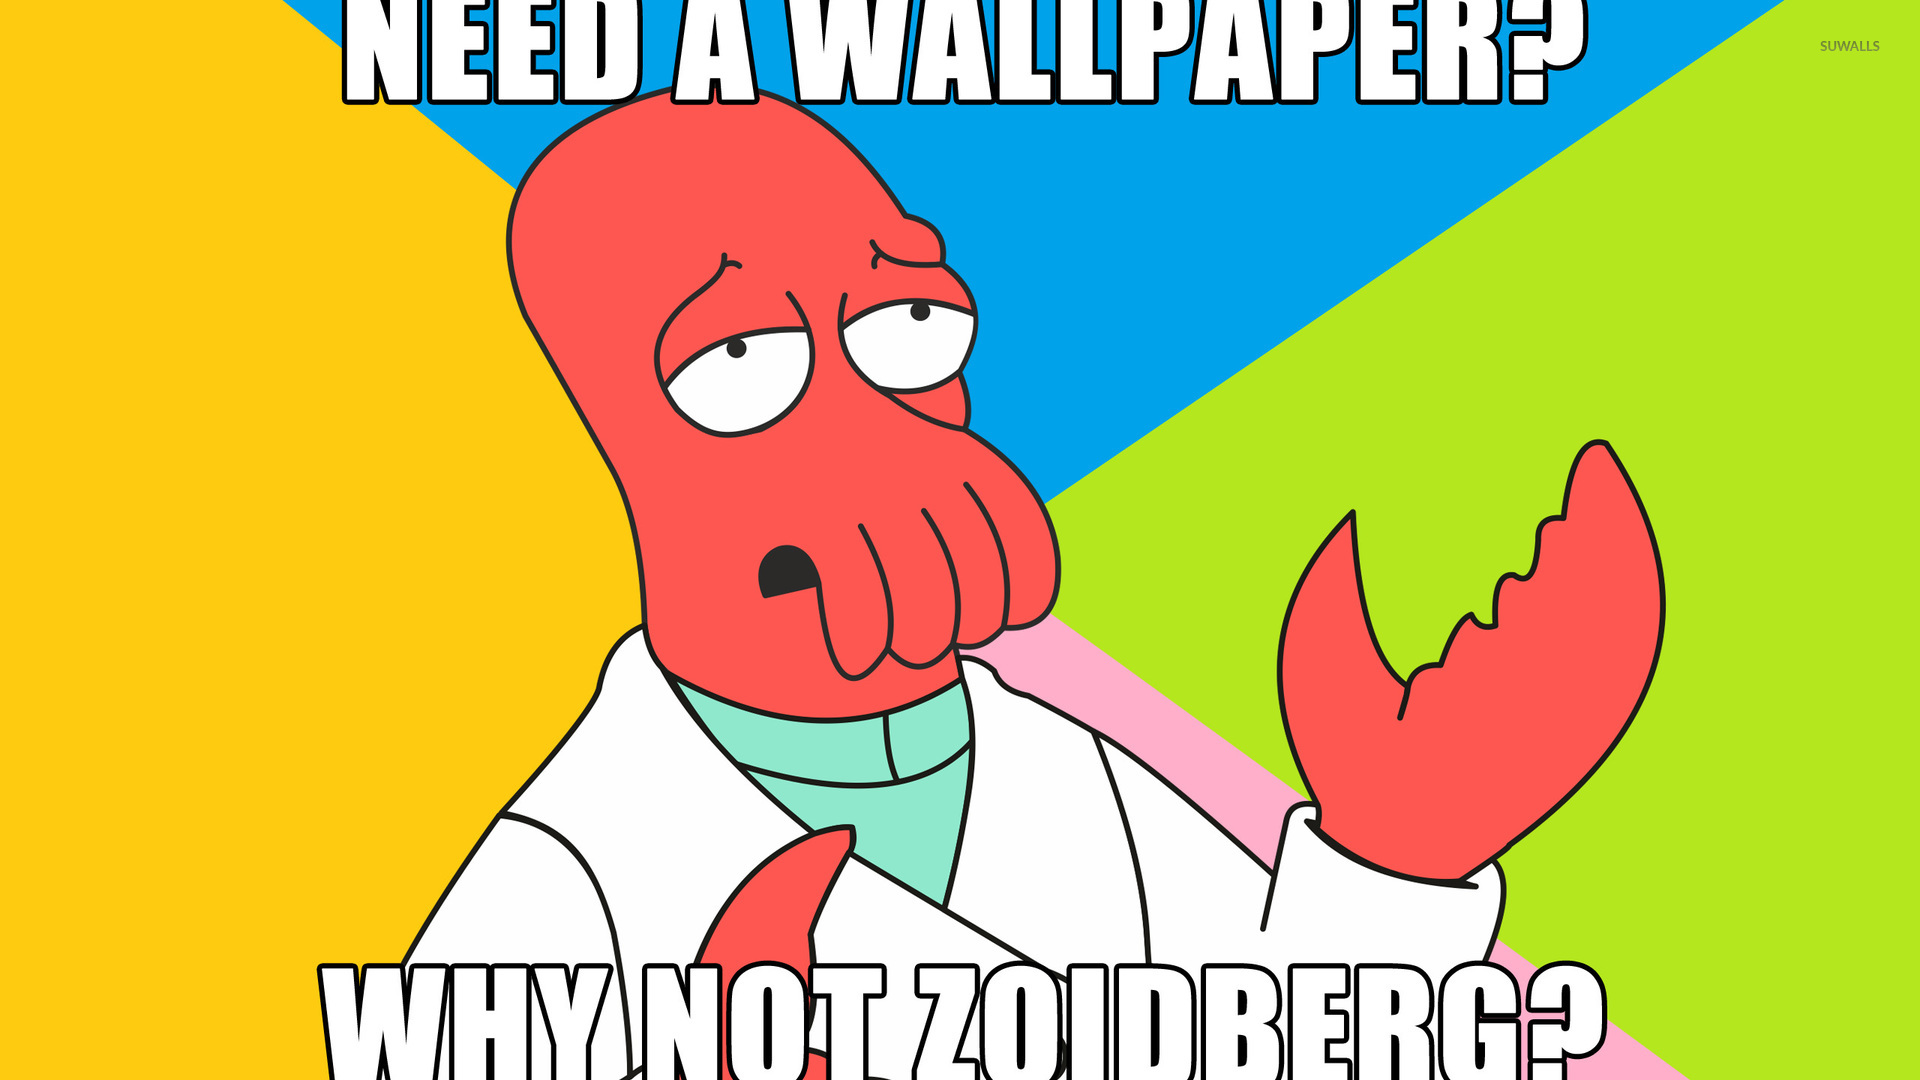 Why not Zoidberg? wallpaper - Meme wallpapers - #9046